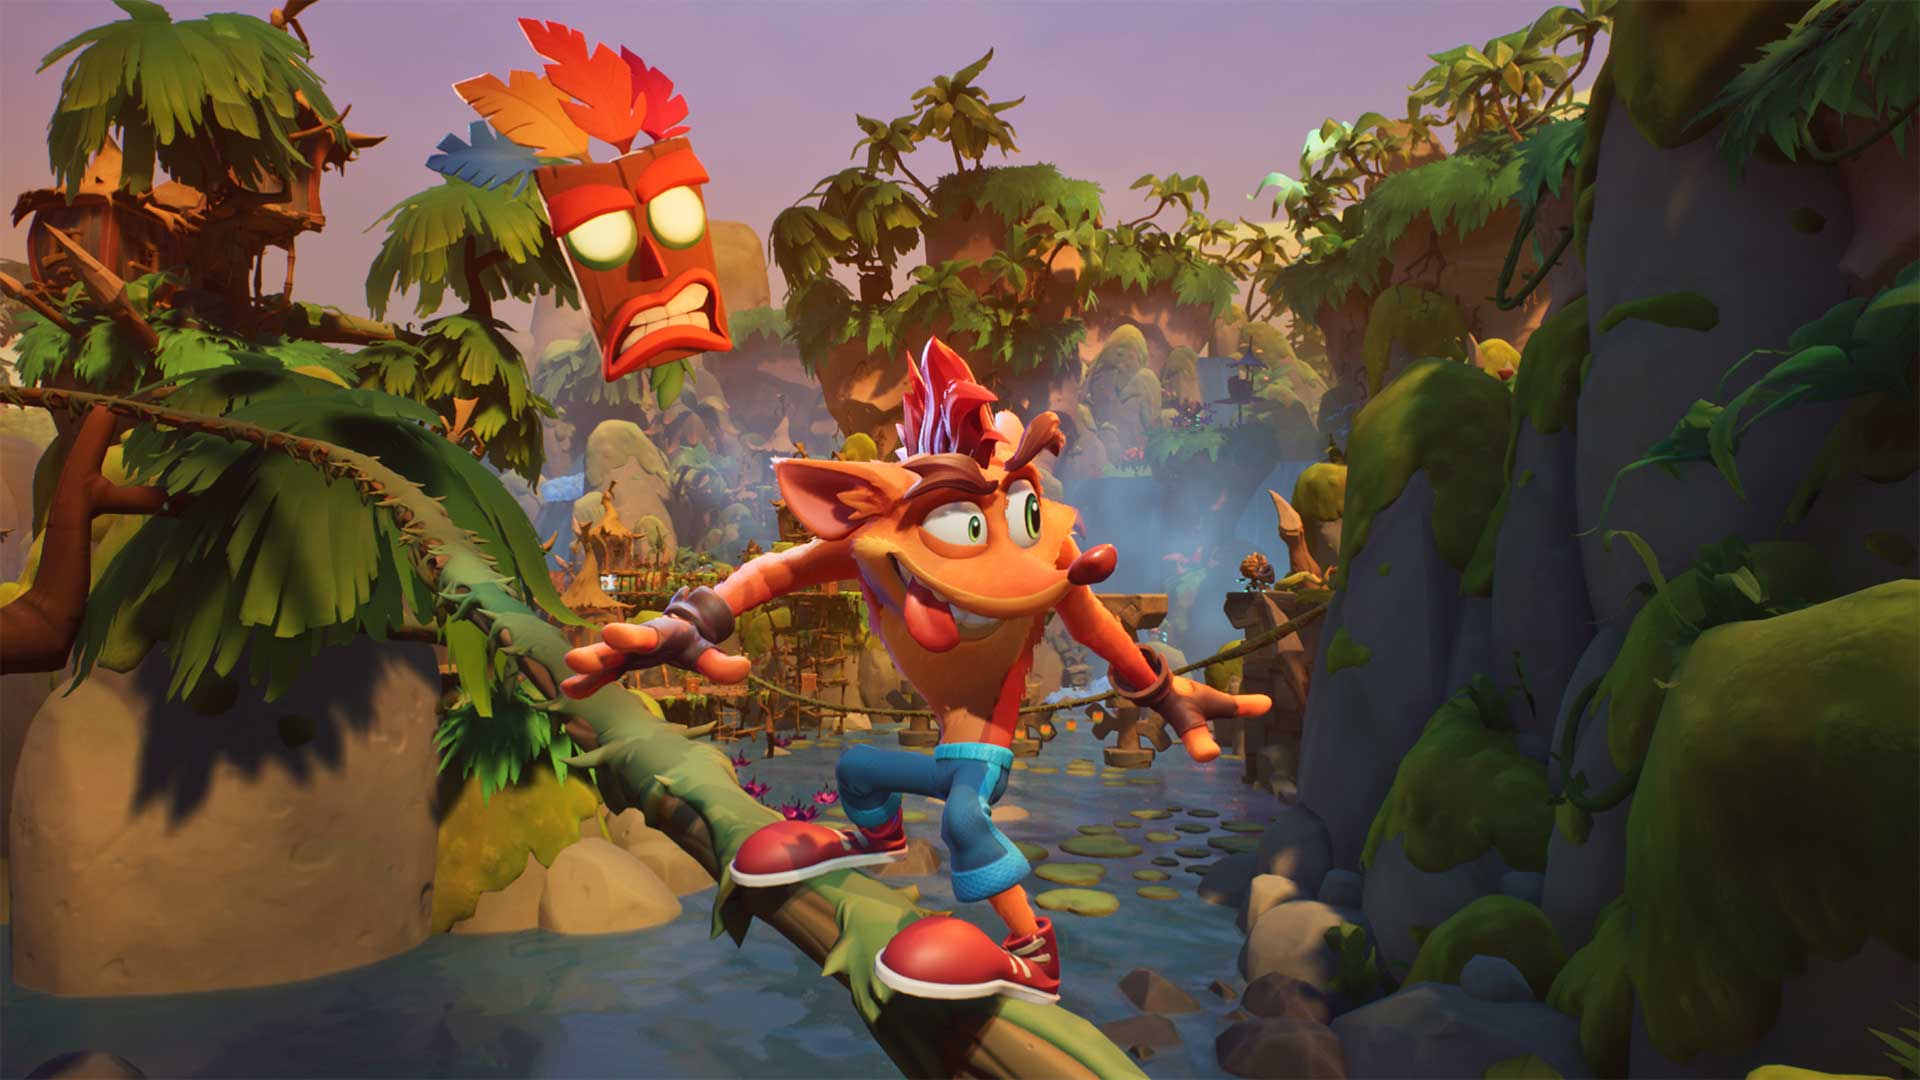 Crash Bandicoot 4: It's About Time Toys for Bob PS4 Xbox One Wumpa League